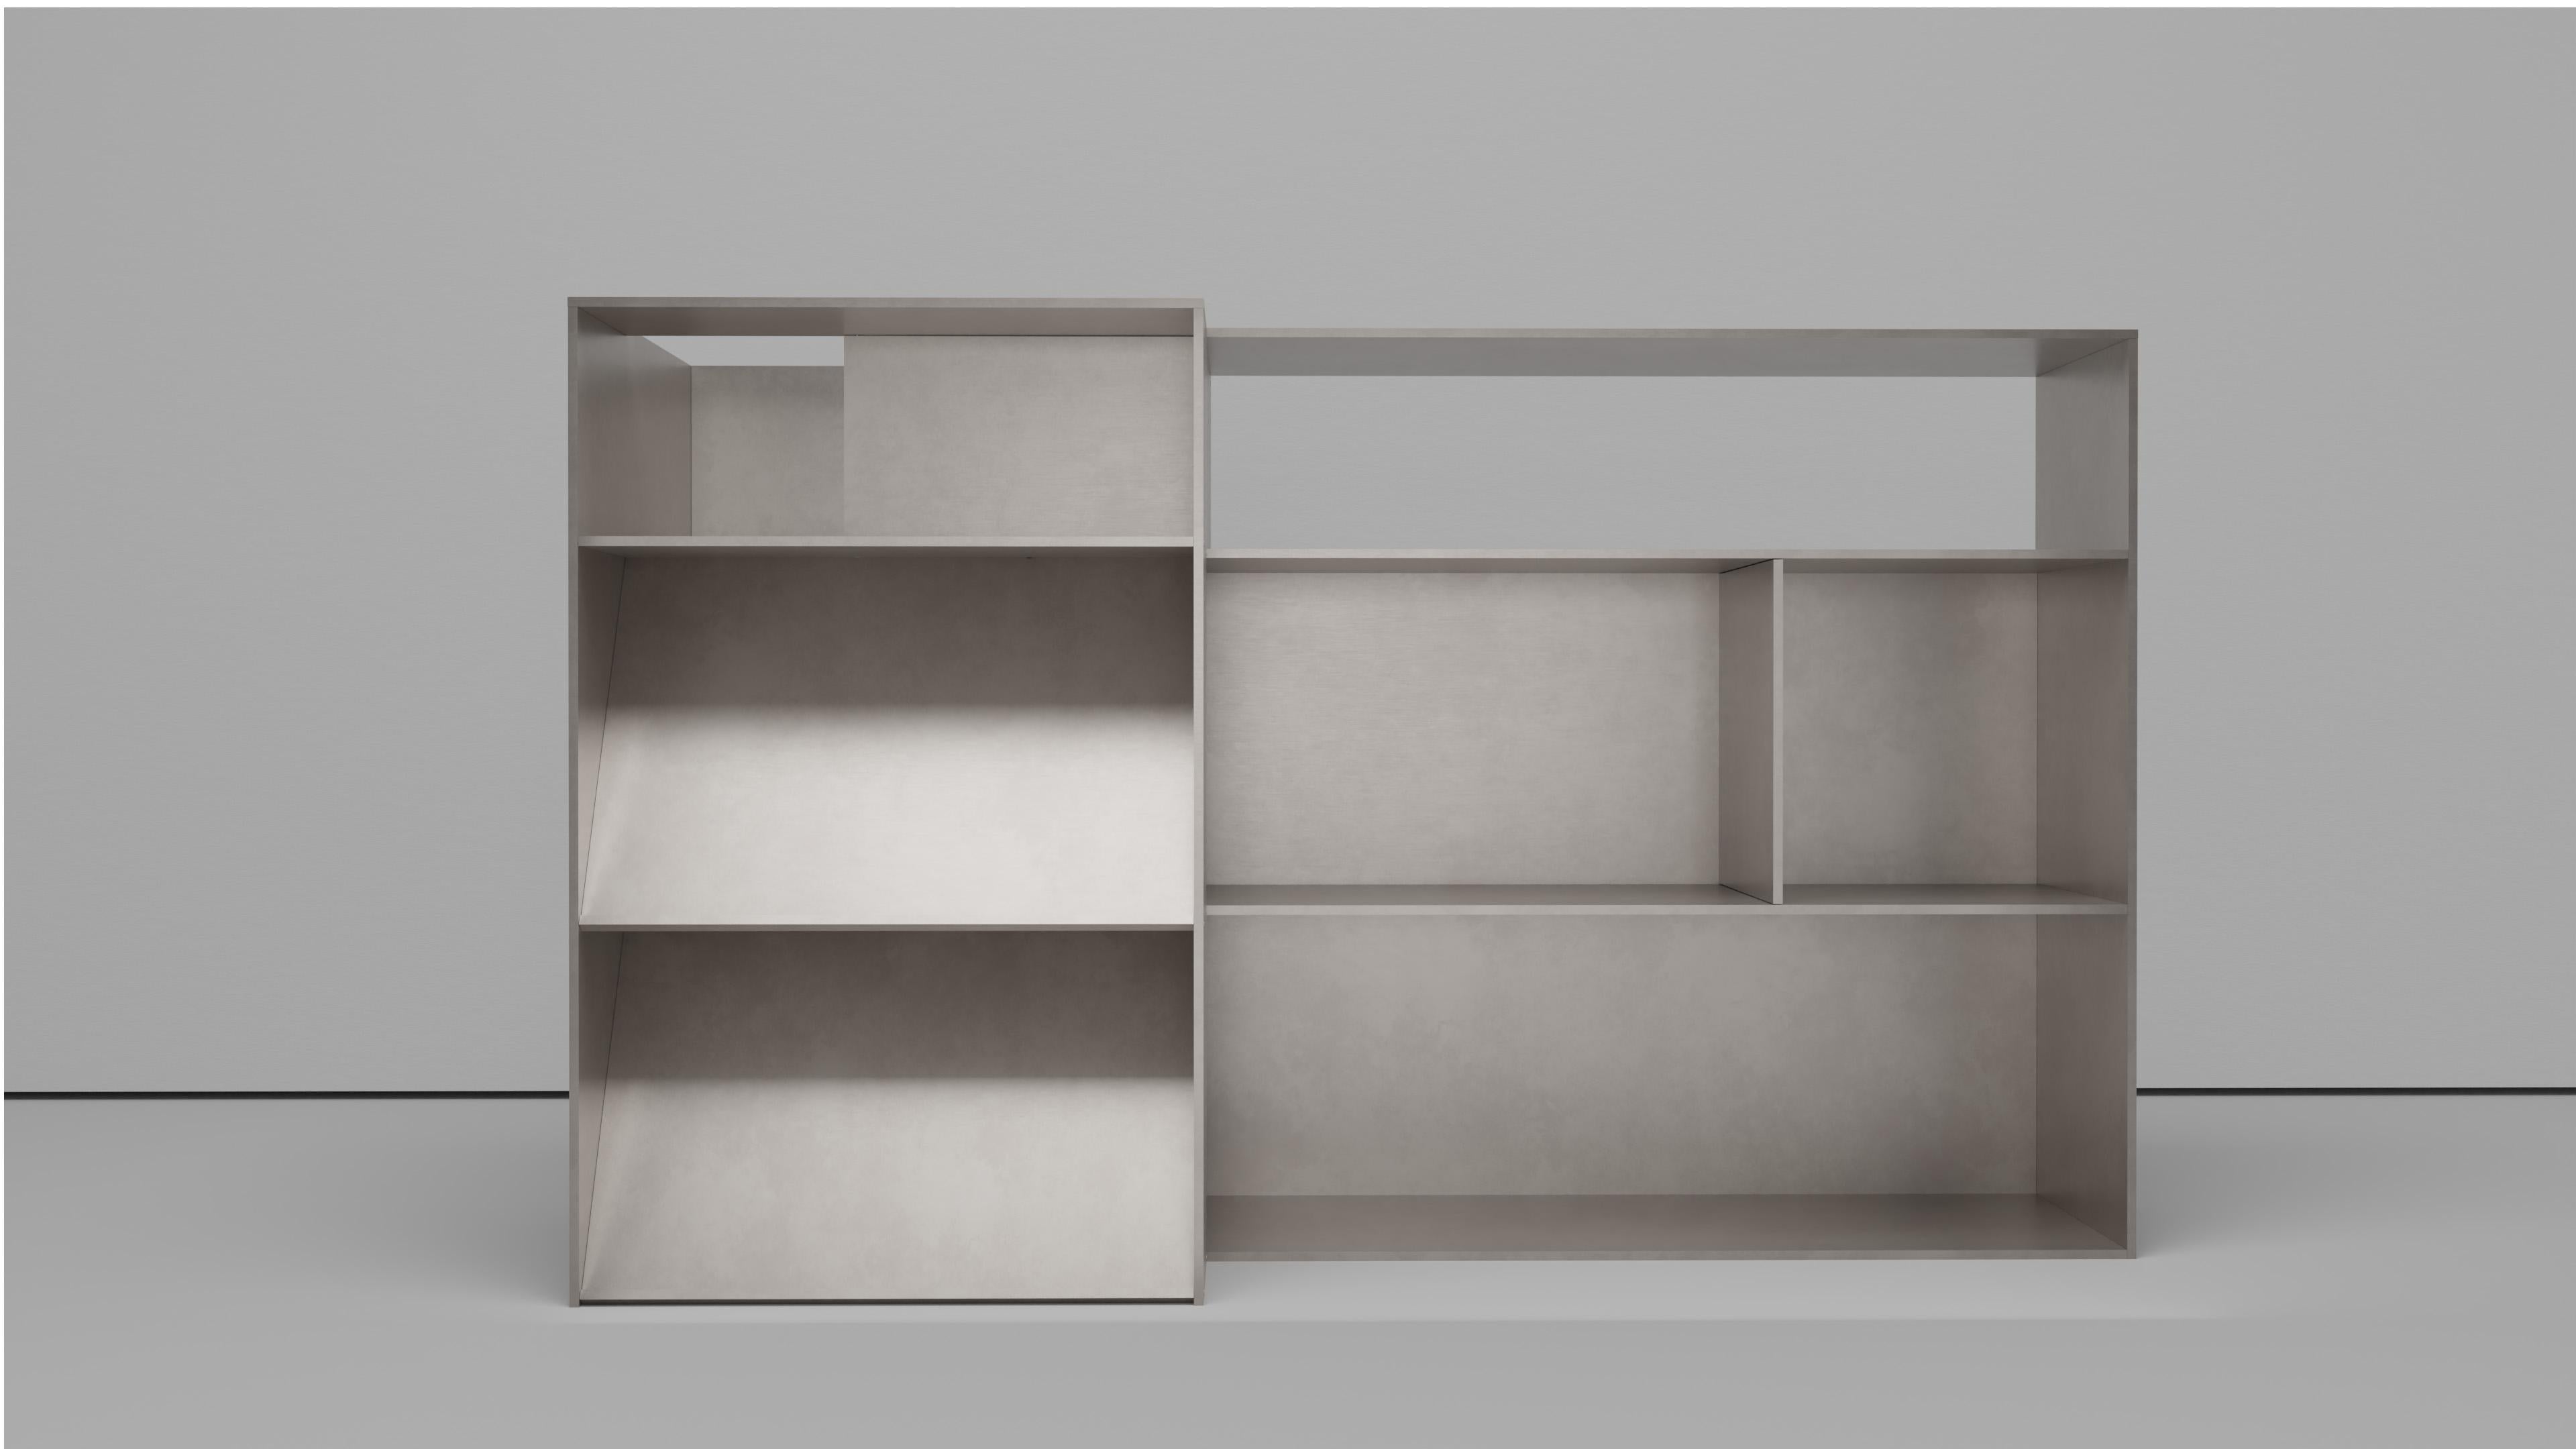 NW Corner Floor Shelf in machine cut 3-8 inch thick aluminum plate. Each element is hand-finished and waxed and bolted together with recessed stainless steel hardware. The underside has a digitally-cut, recessed 1-8 inch delrin foot to protect the